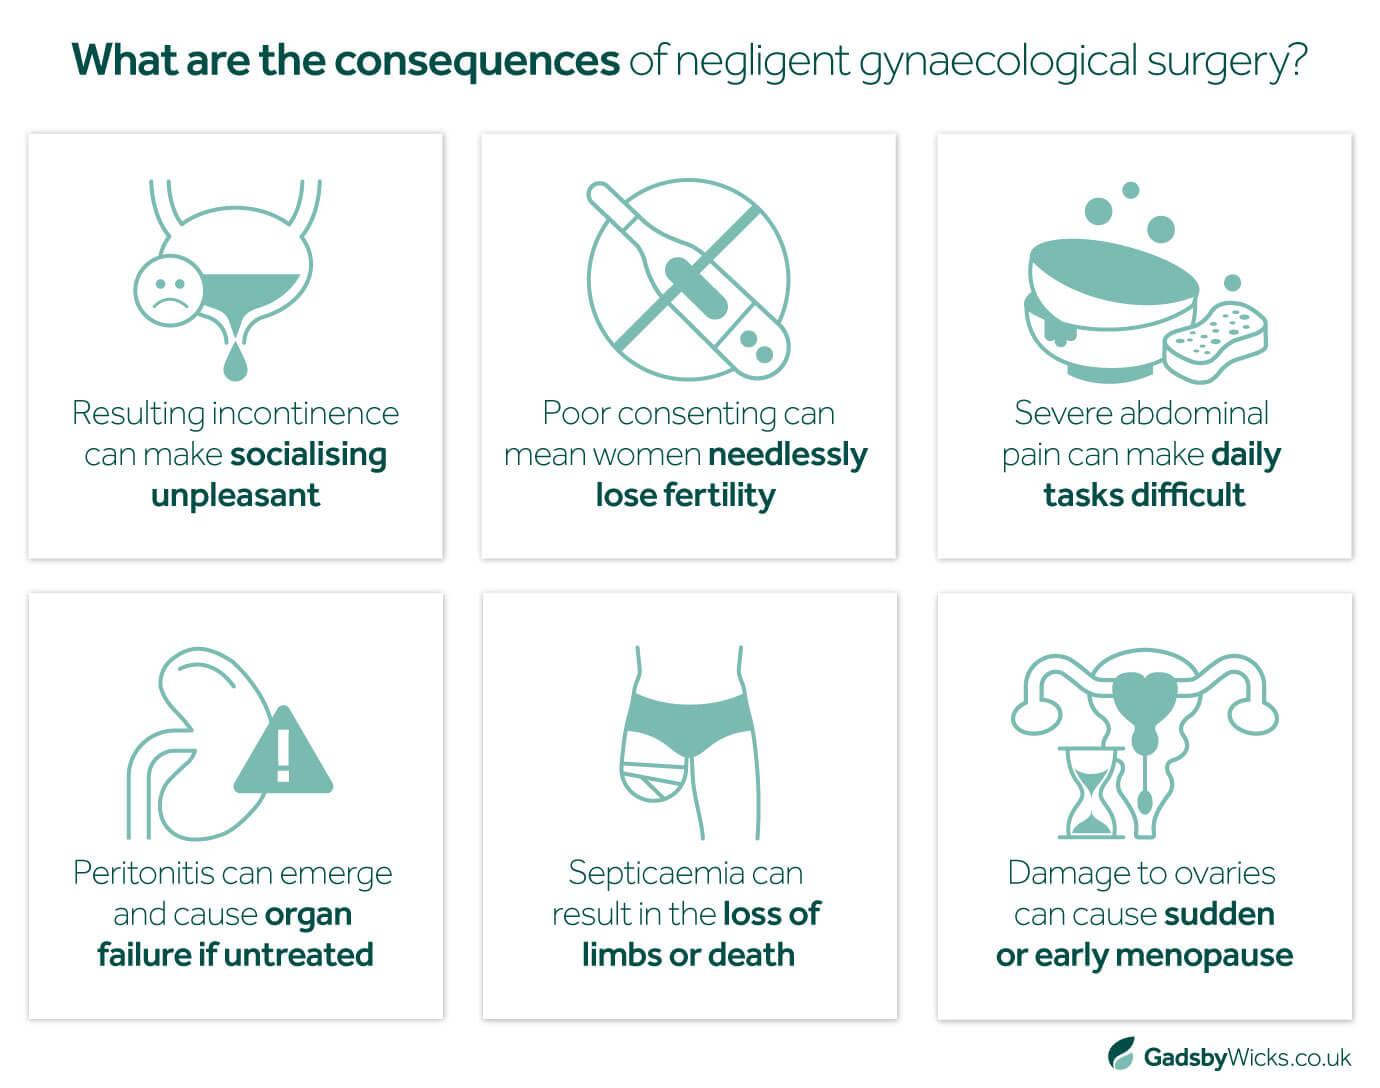 Consequences of negligent gynaecological surgery - Infographic image